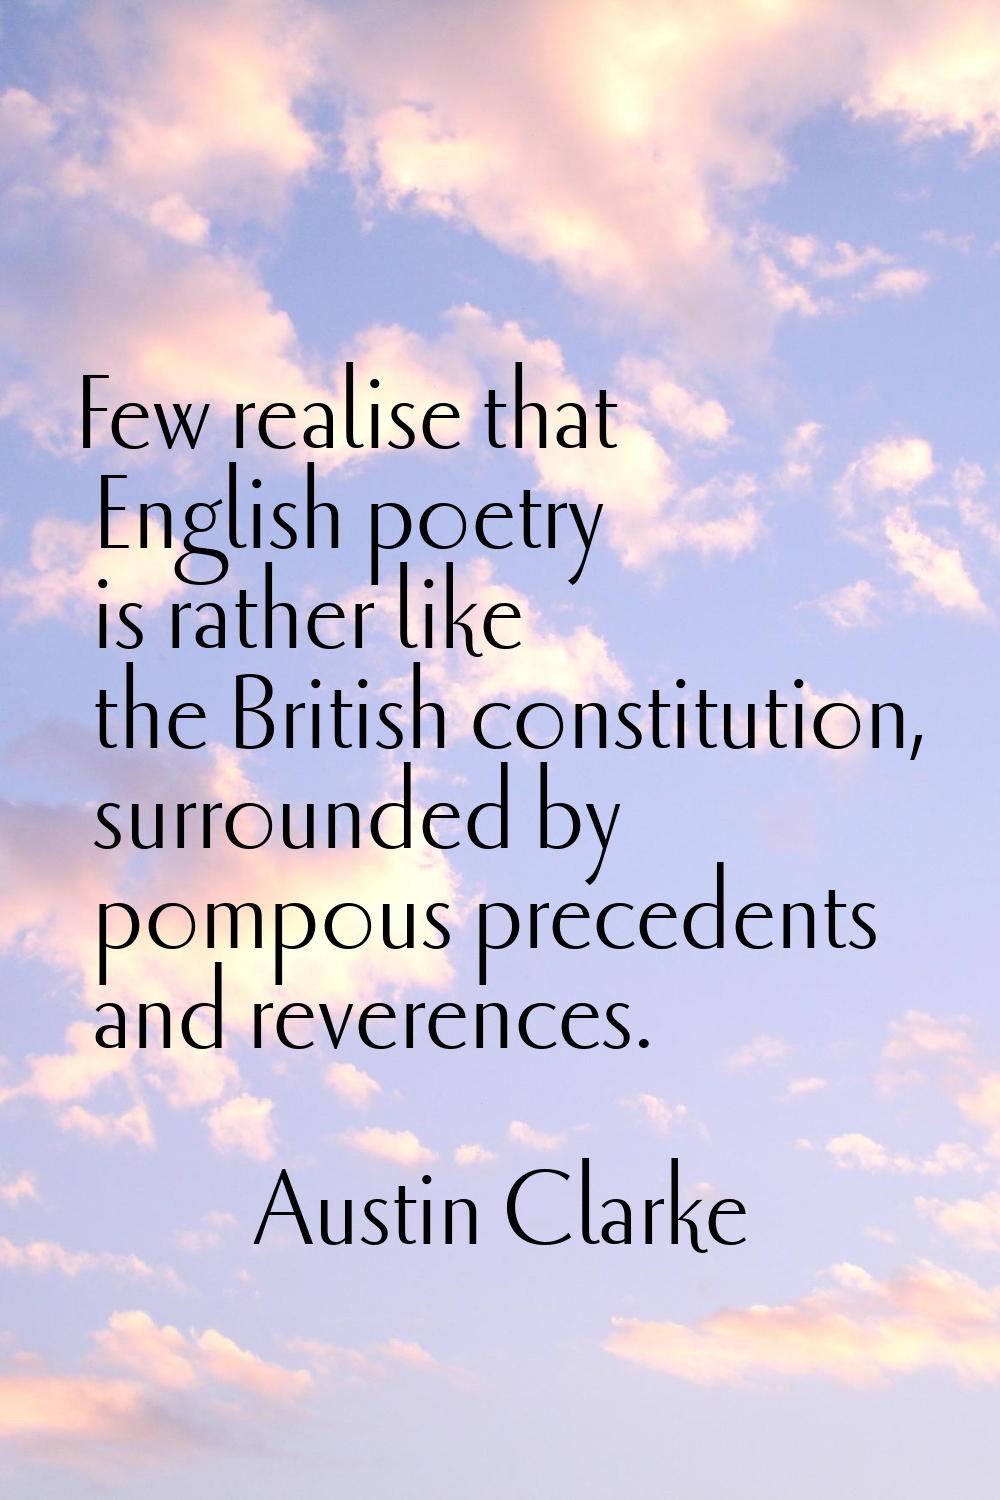 Few realise that English poetry is rather like the British constitution, surrounded by pompous prec